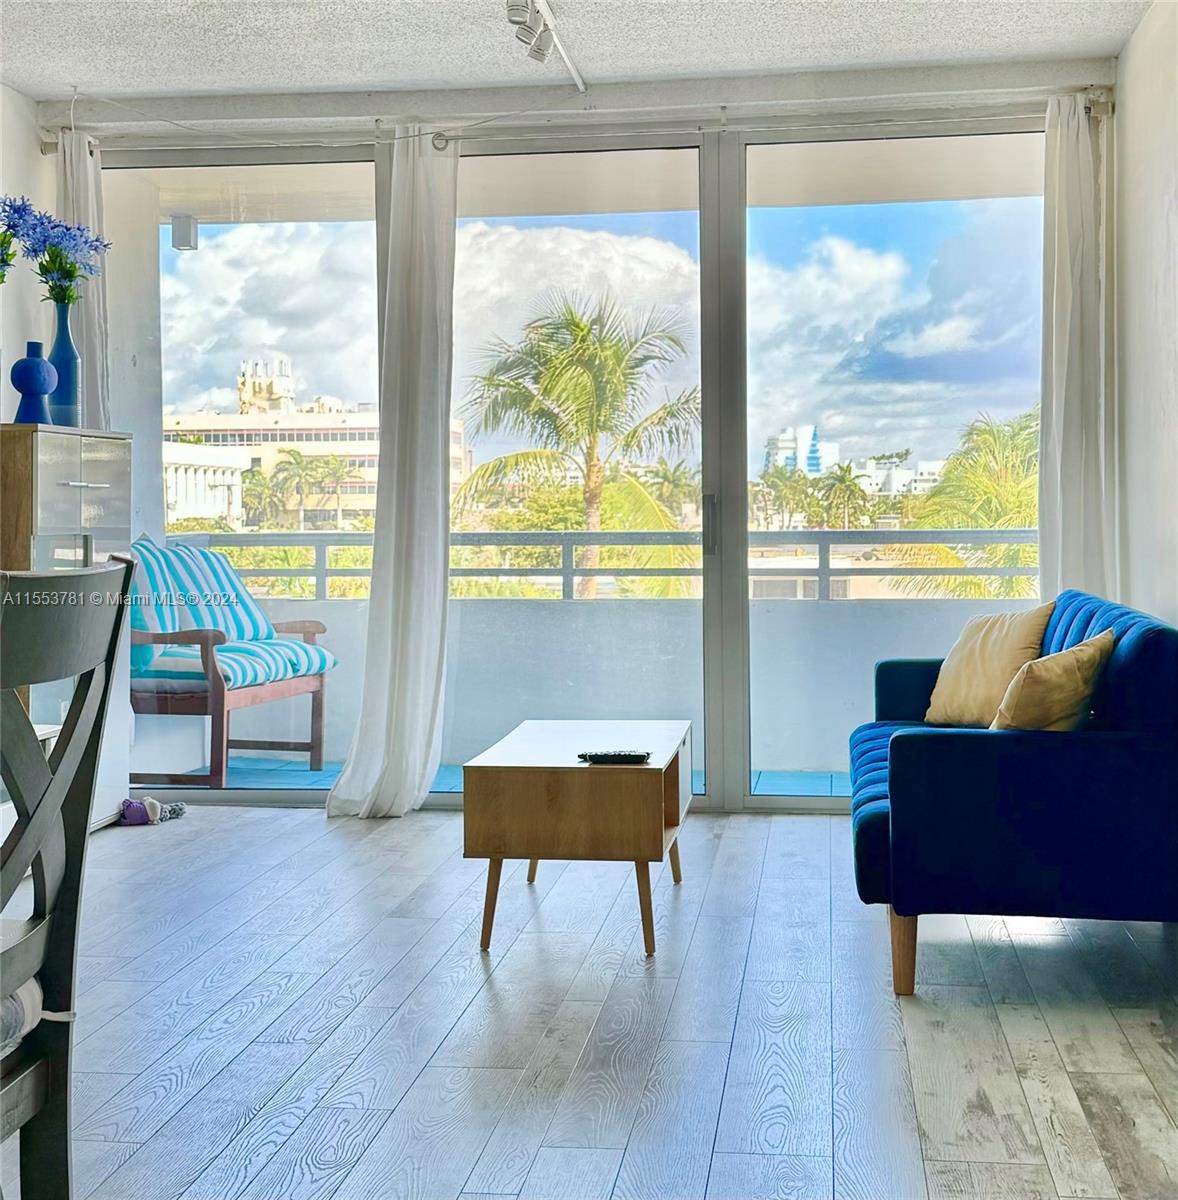 Bright, Renovated, in Bay Harbor Islands!! A+ Rated K-8 school, walking distance to Bal Harbour Shops, Restaurants, Places of Worship, Beach. Recently Renovated with Permits: Kitchen, Bathrooms, Impact Windows & Doors, A/C, Floors, 2nd Bedroom/Den. Large Primary Bedroom (12' x 16') with his/hers closets.  Ready to Move in or Rent out.  Amenties: Pool, BBQ, Bike Storage, Sauna, Basketball and Tennis Courts across the street. North facing, lots of light. Spacious 6' deep balcony.